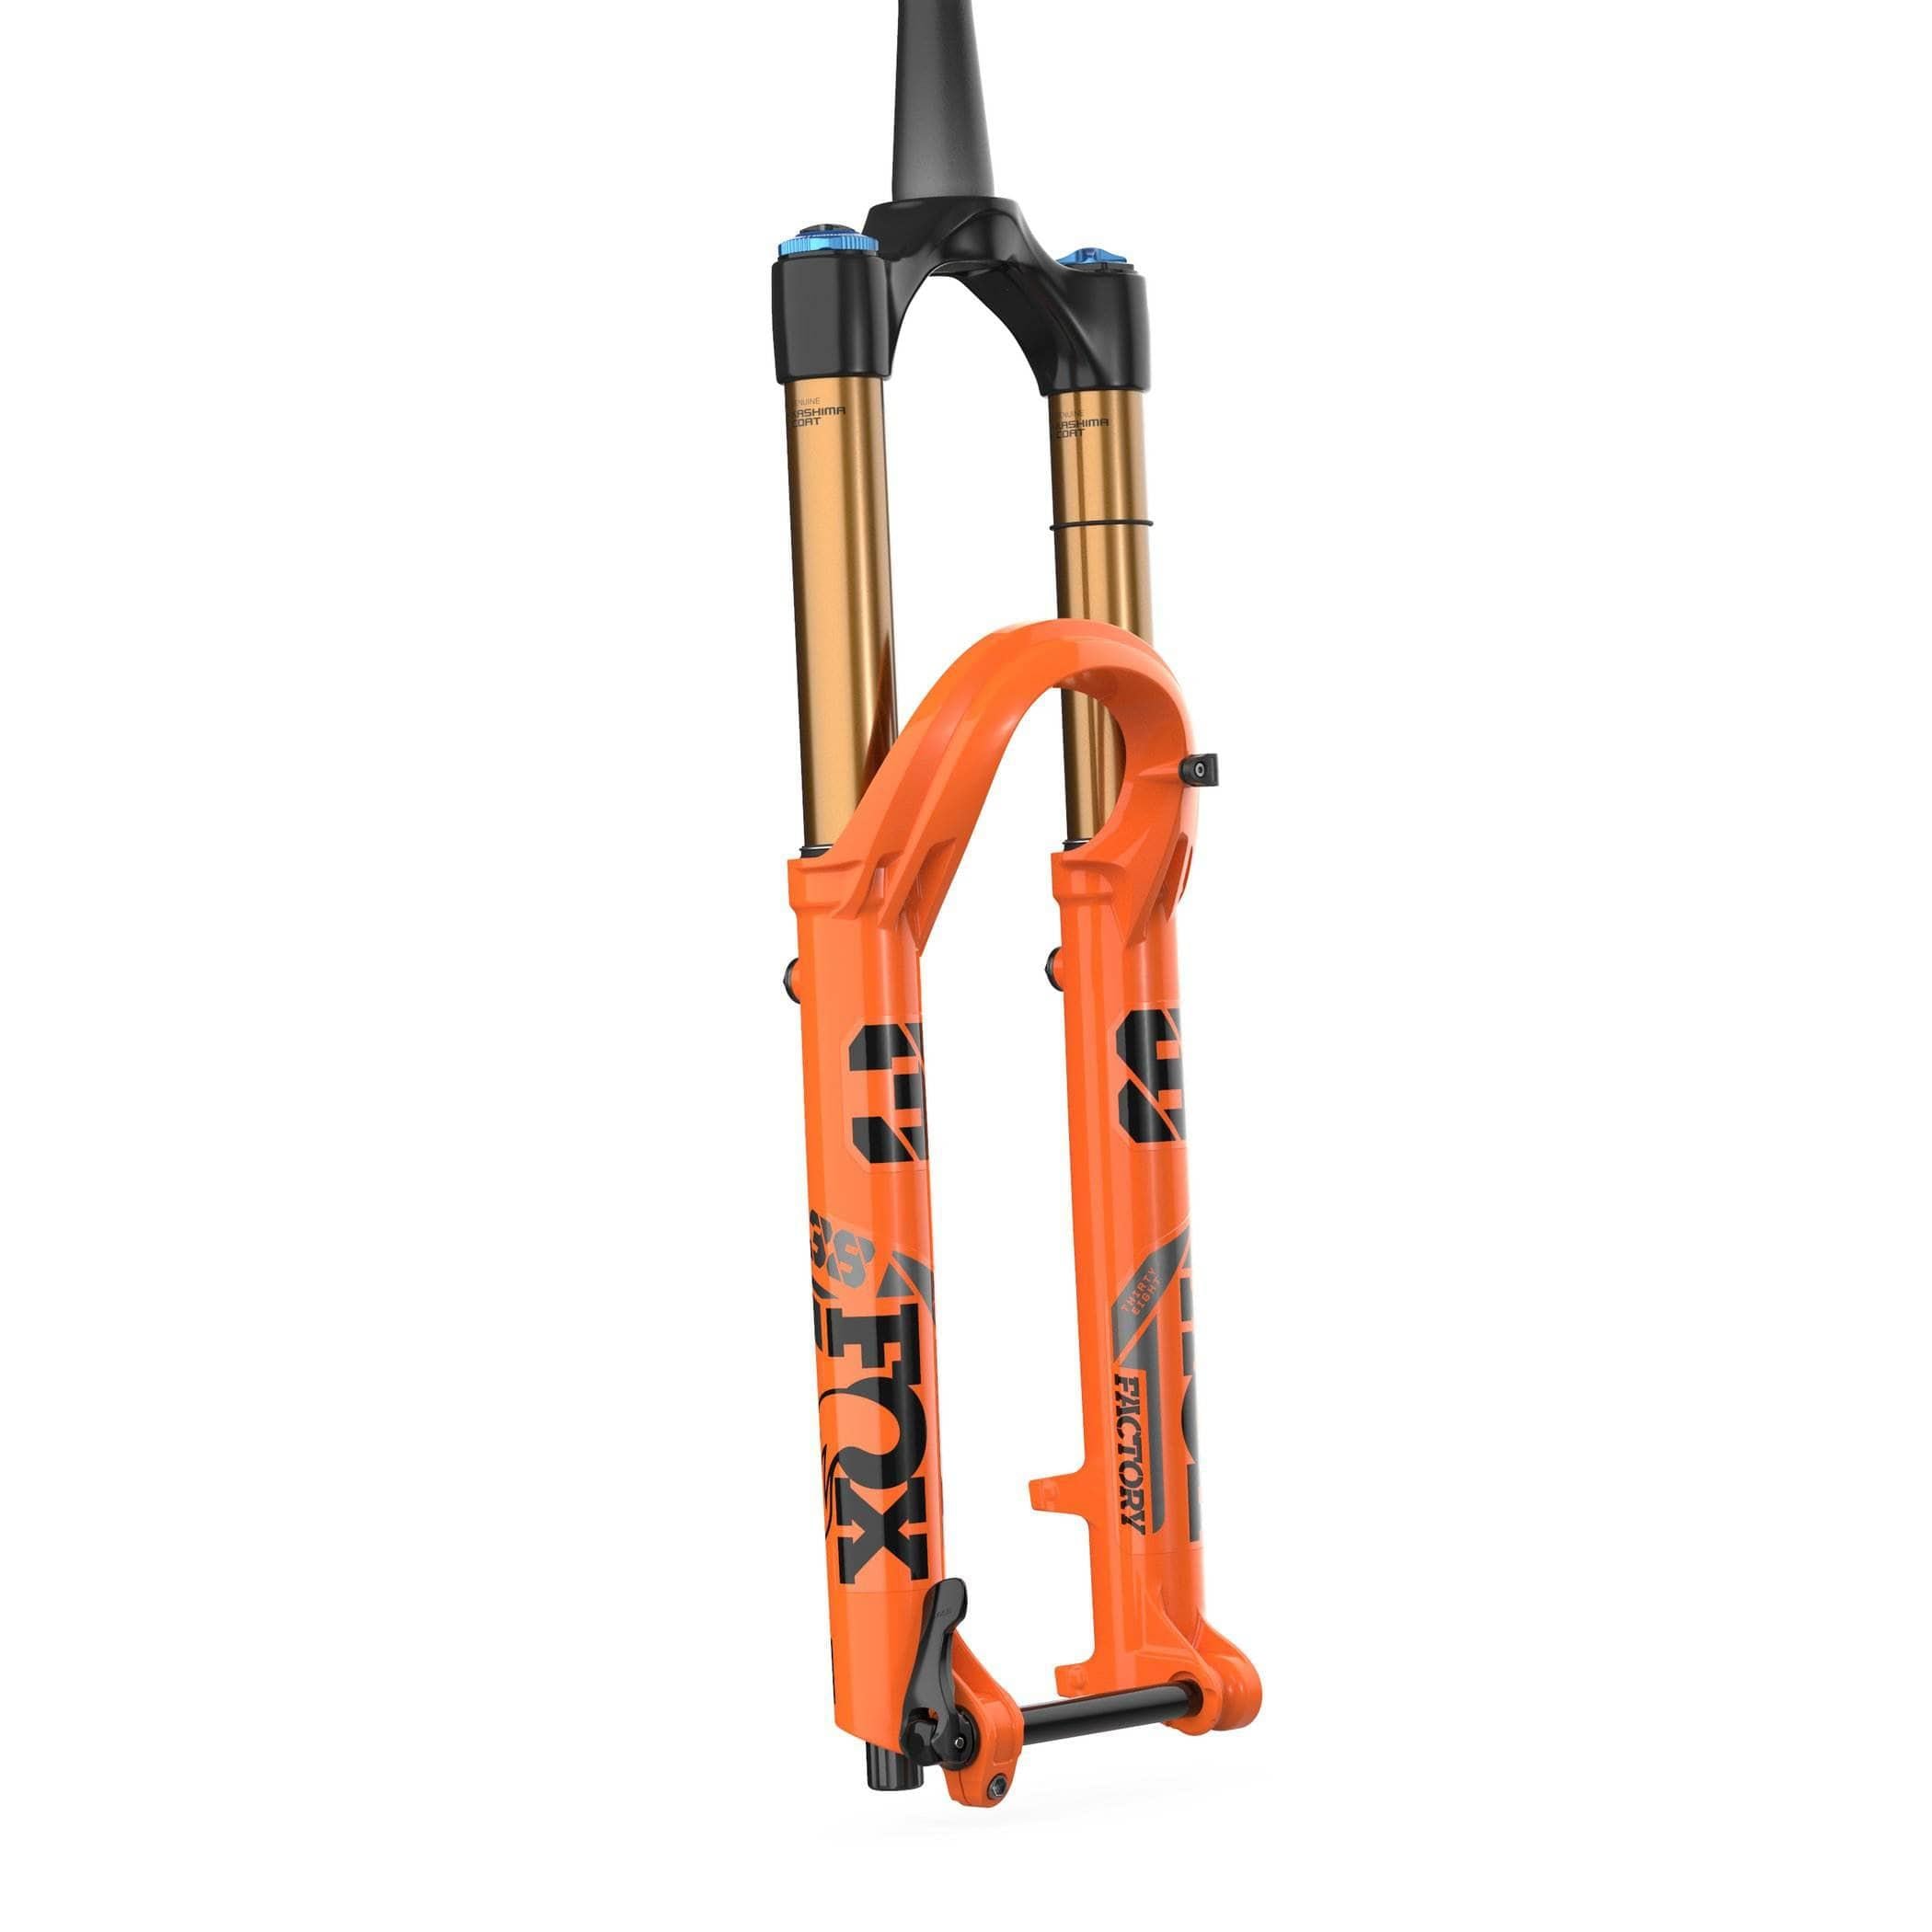 FOX Suspensions FOX Suspensions Factory Series MY22 FLOAT 38 Fork Grip2 15QRx110 Boost 29" Shiny Orange / 44mm Offset / 170mm